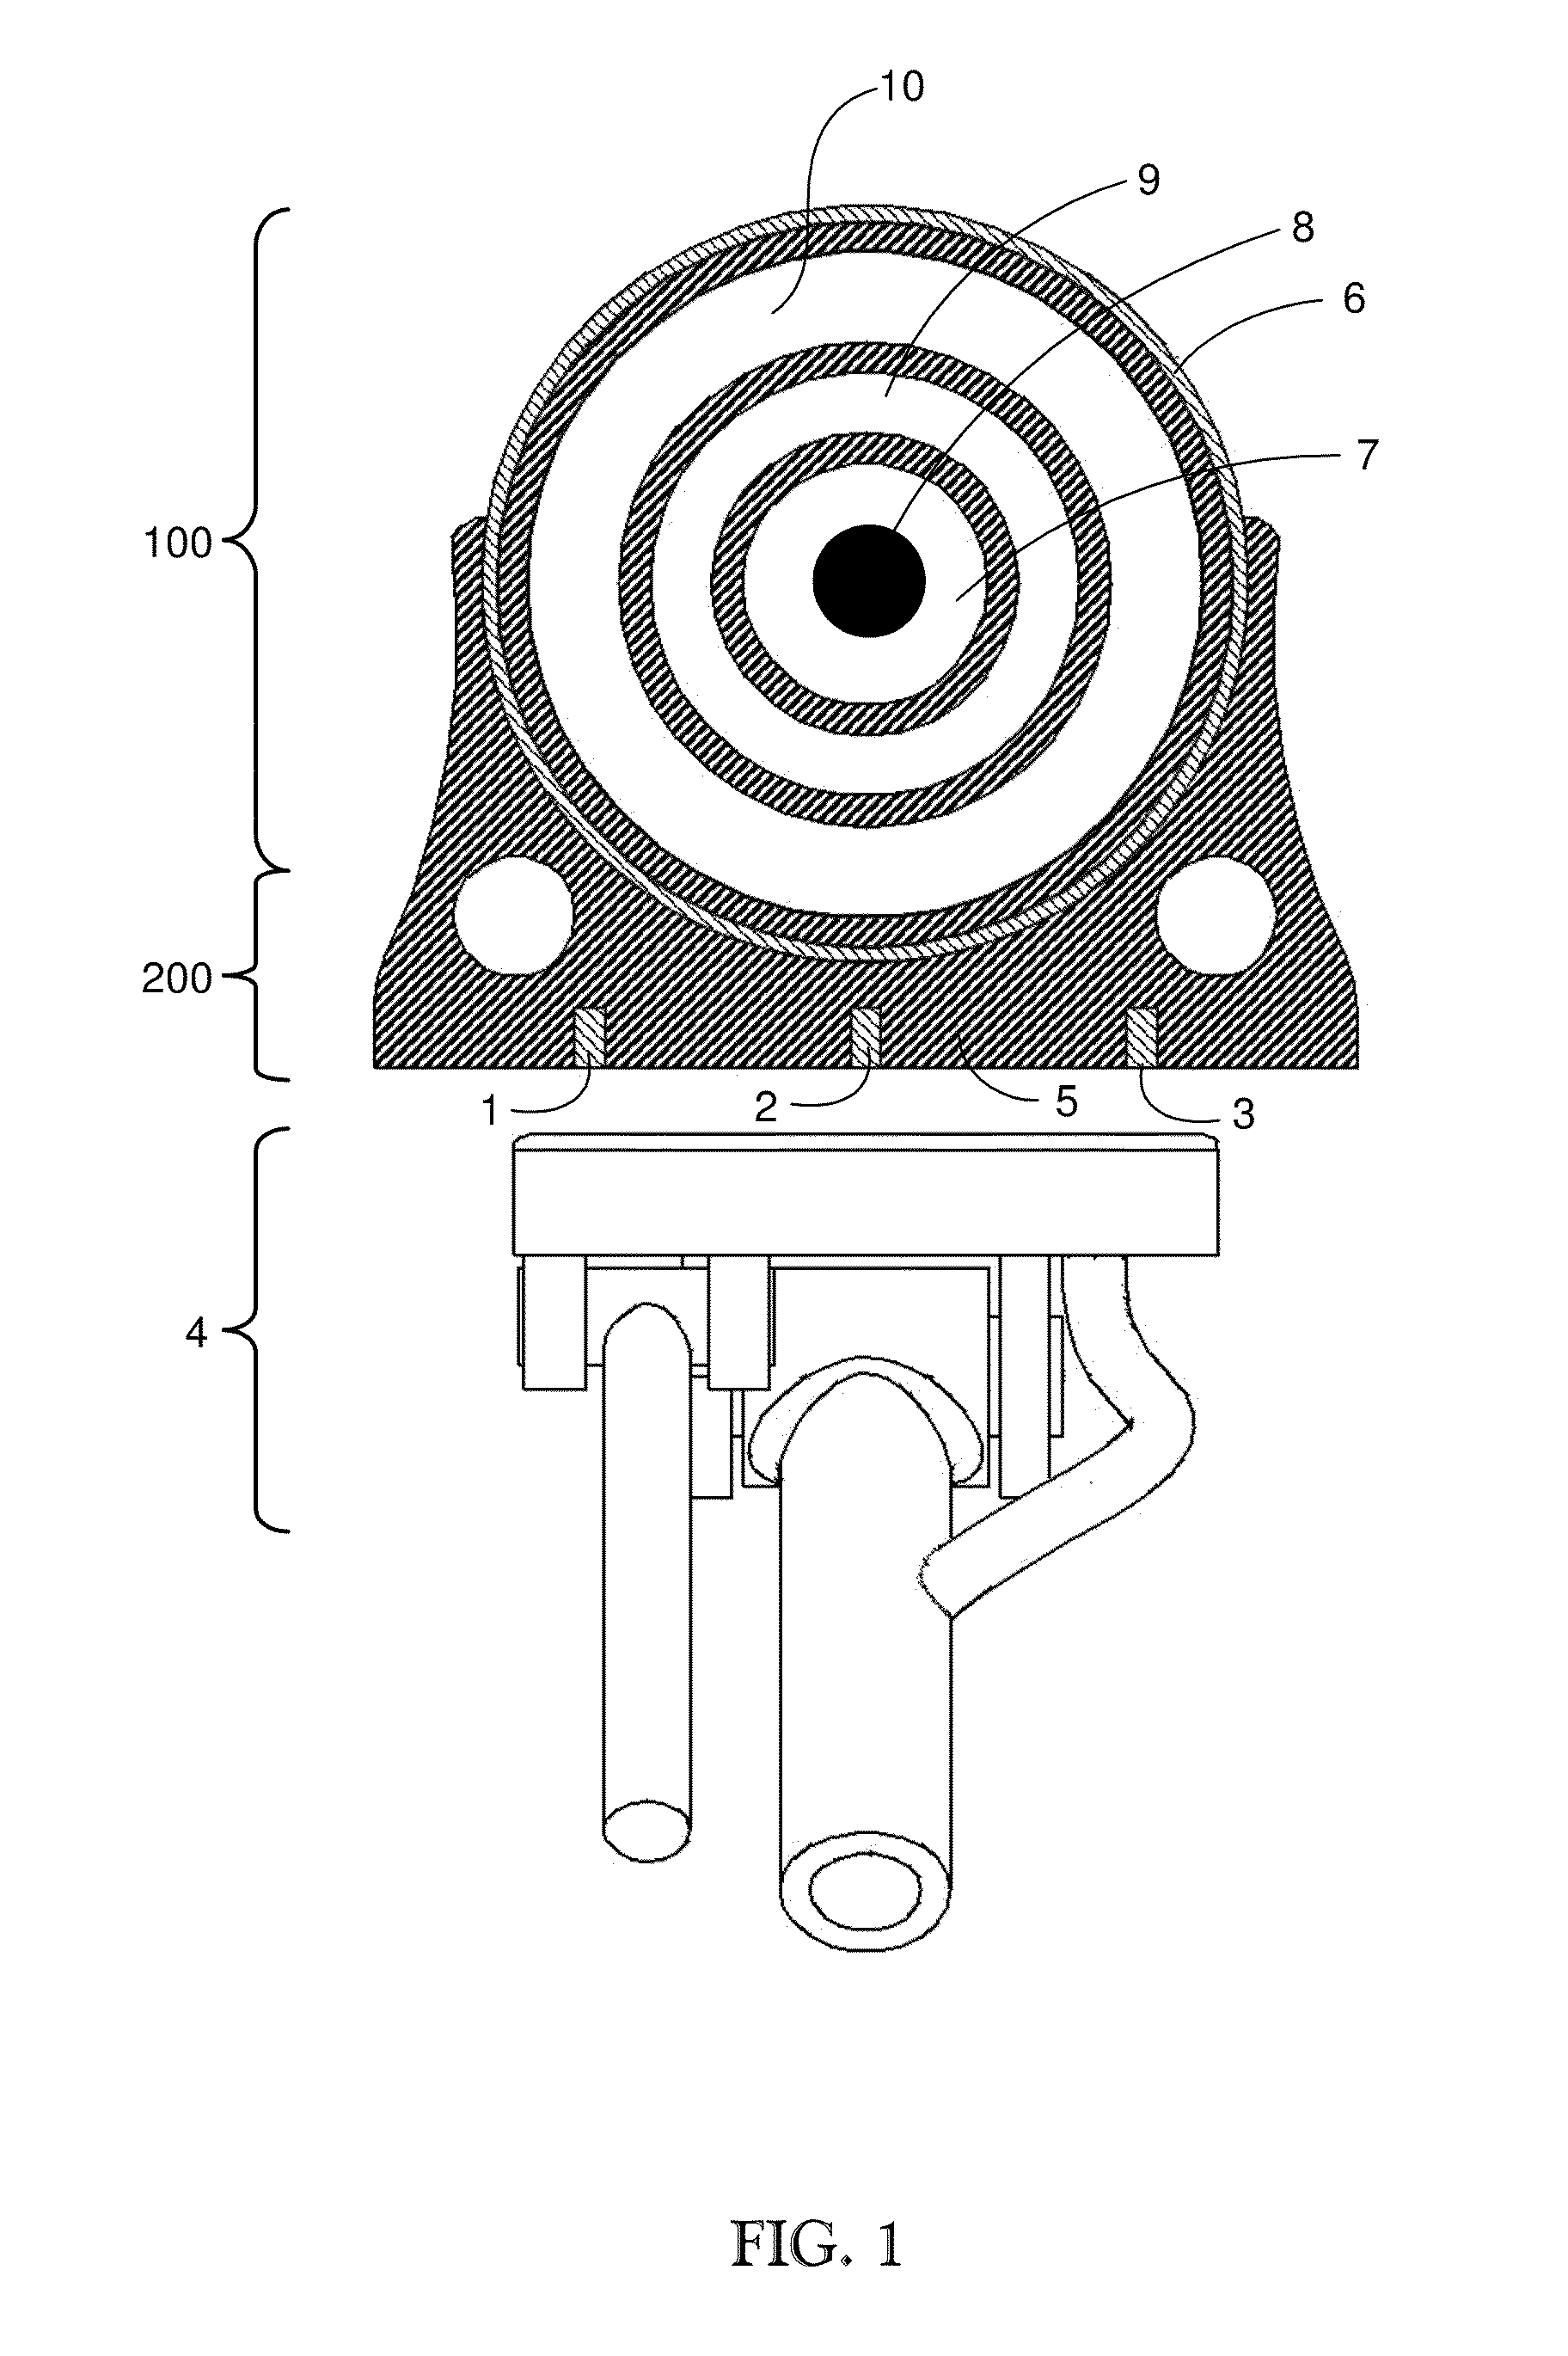 Electrical connection device for electric vehicles